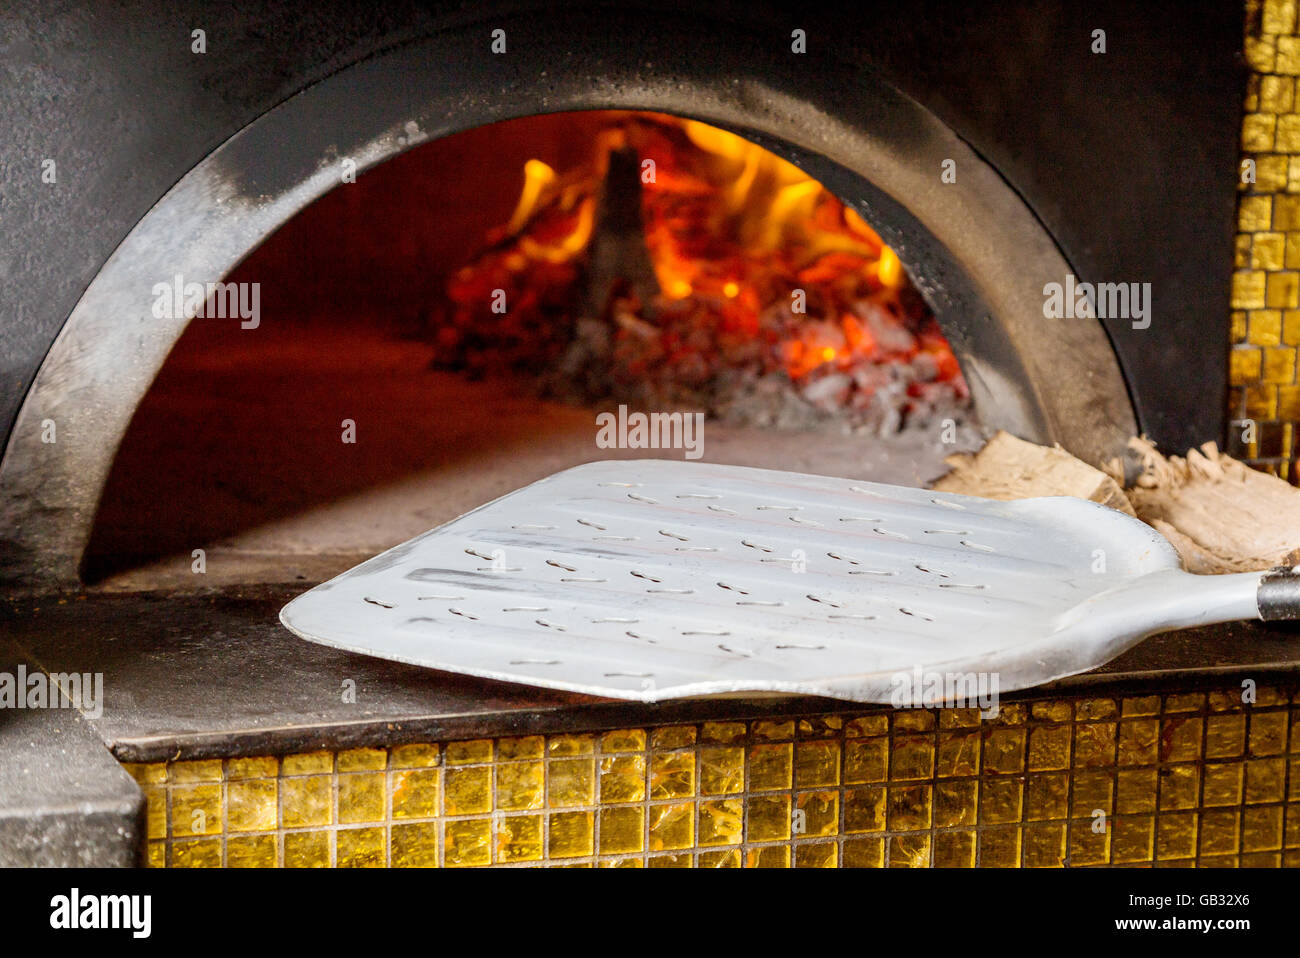 massive oven for pizza on firewood with fire in furnace Stock Photo